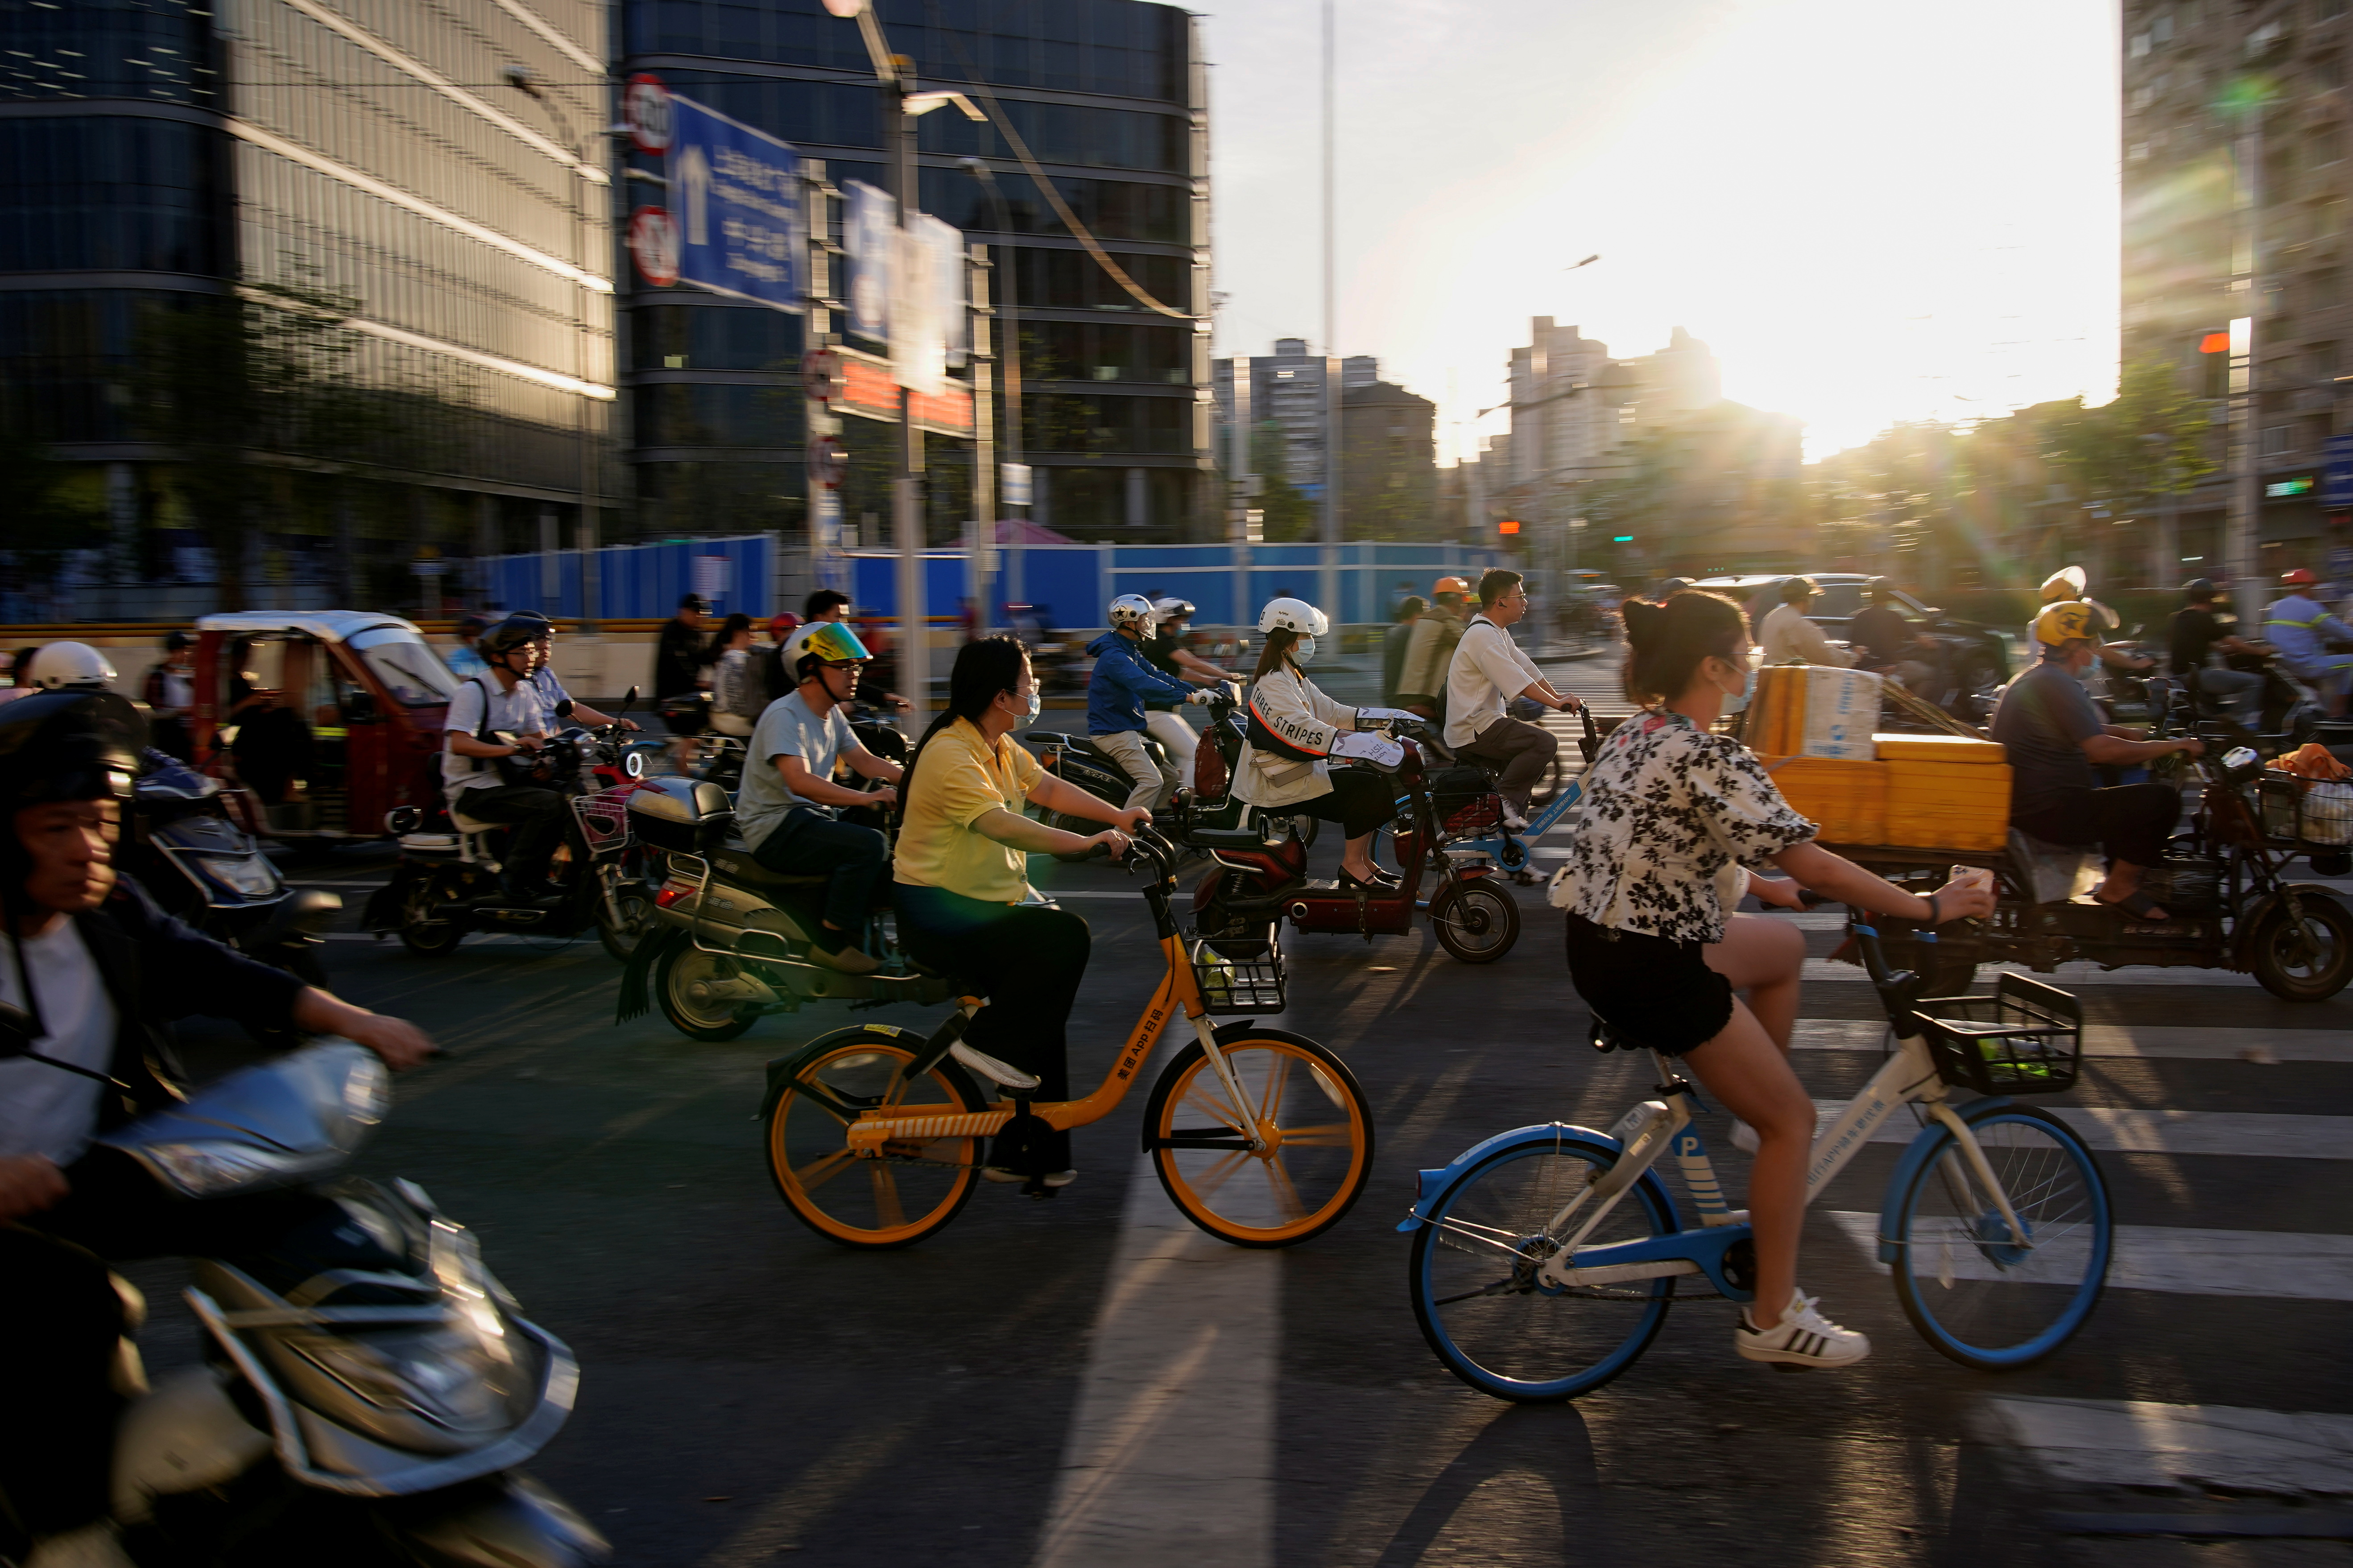 People ride bicycles and motorbikes on a street, amid the coronavirus disease pandemic, in Shanghai